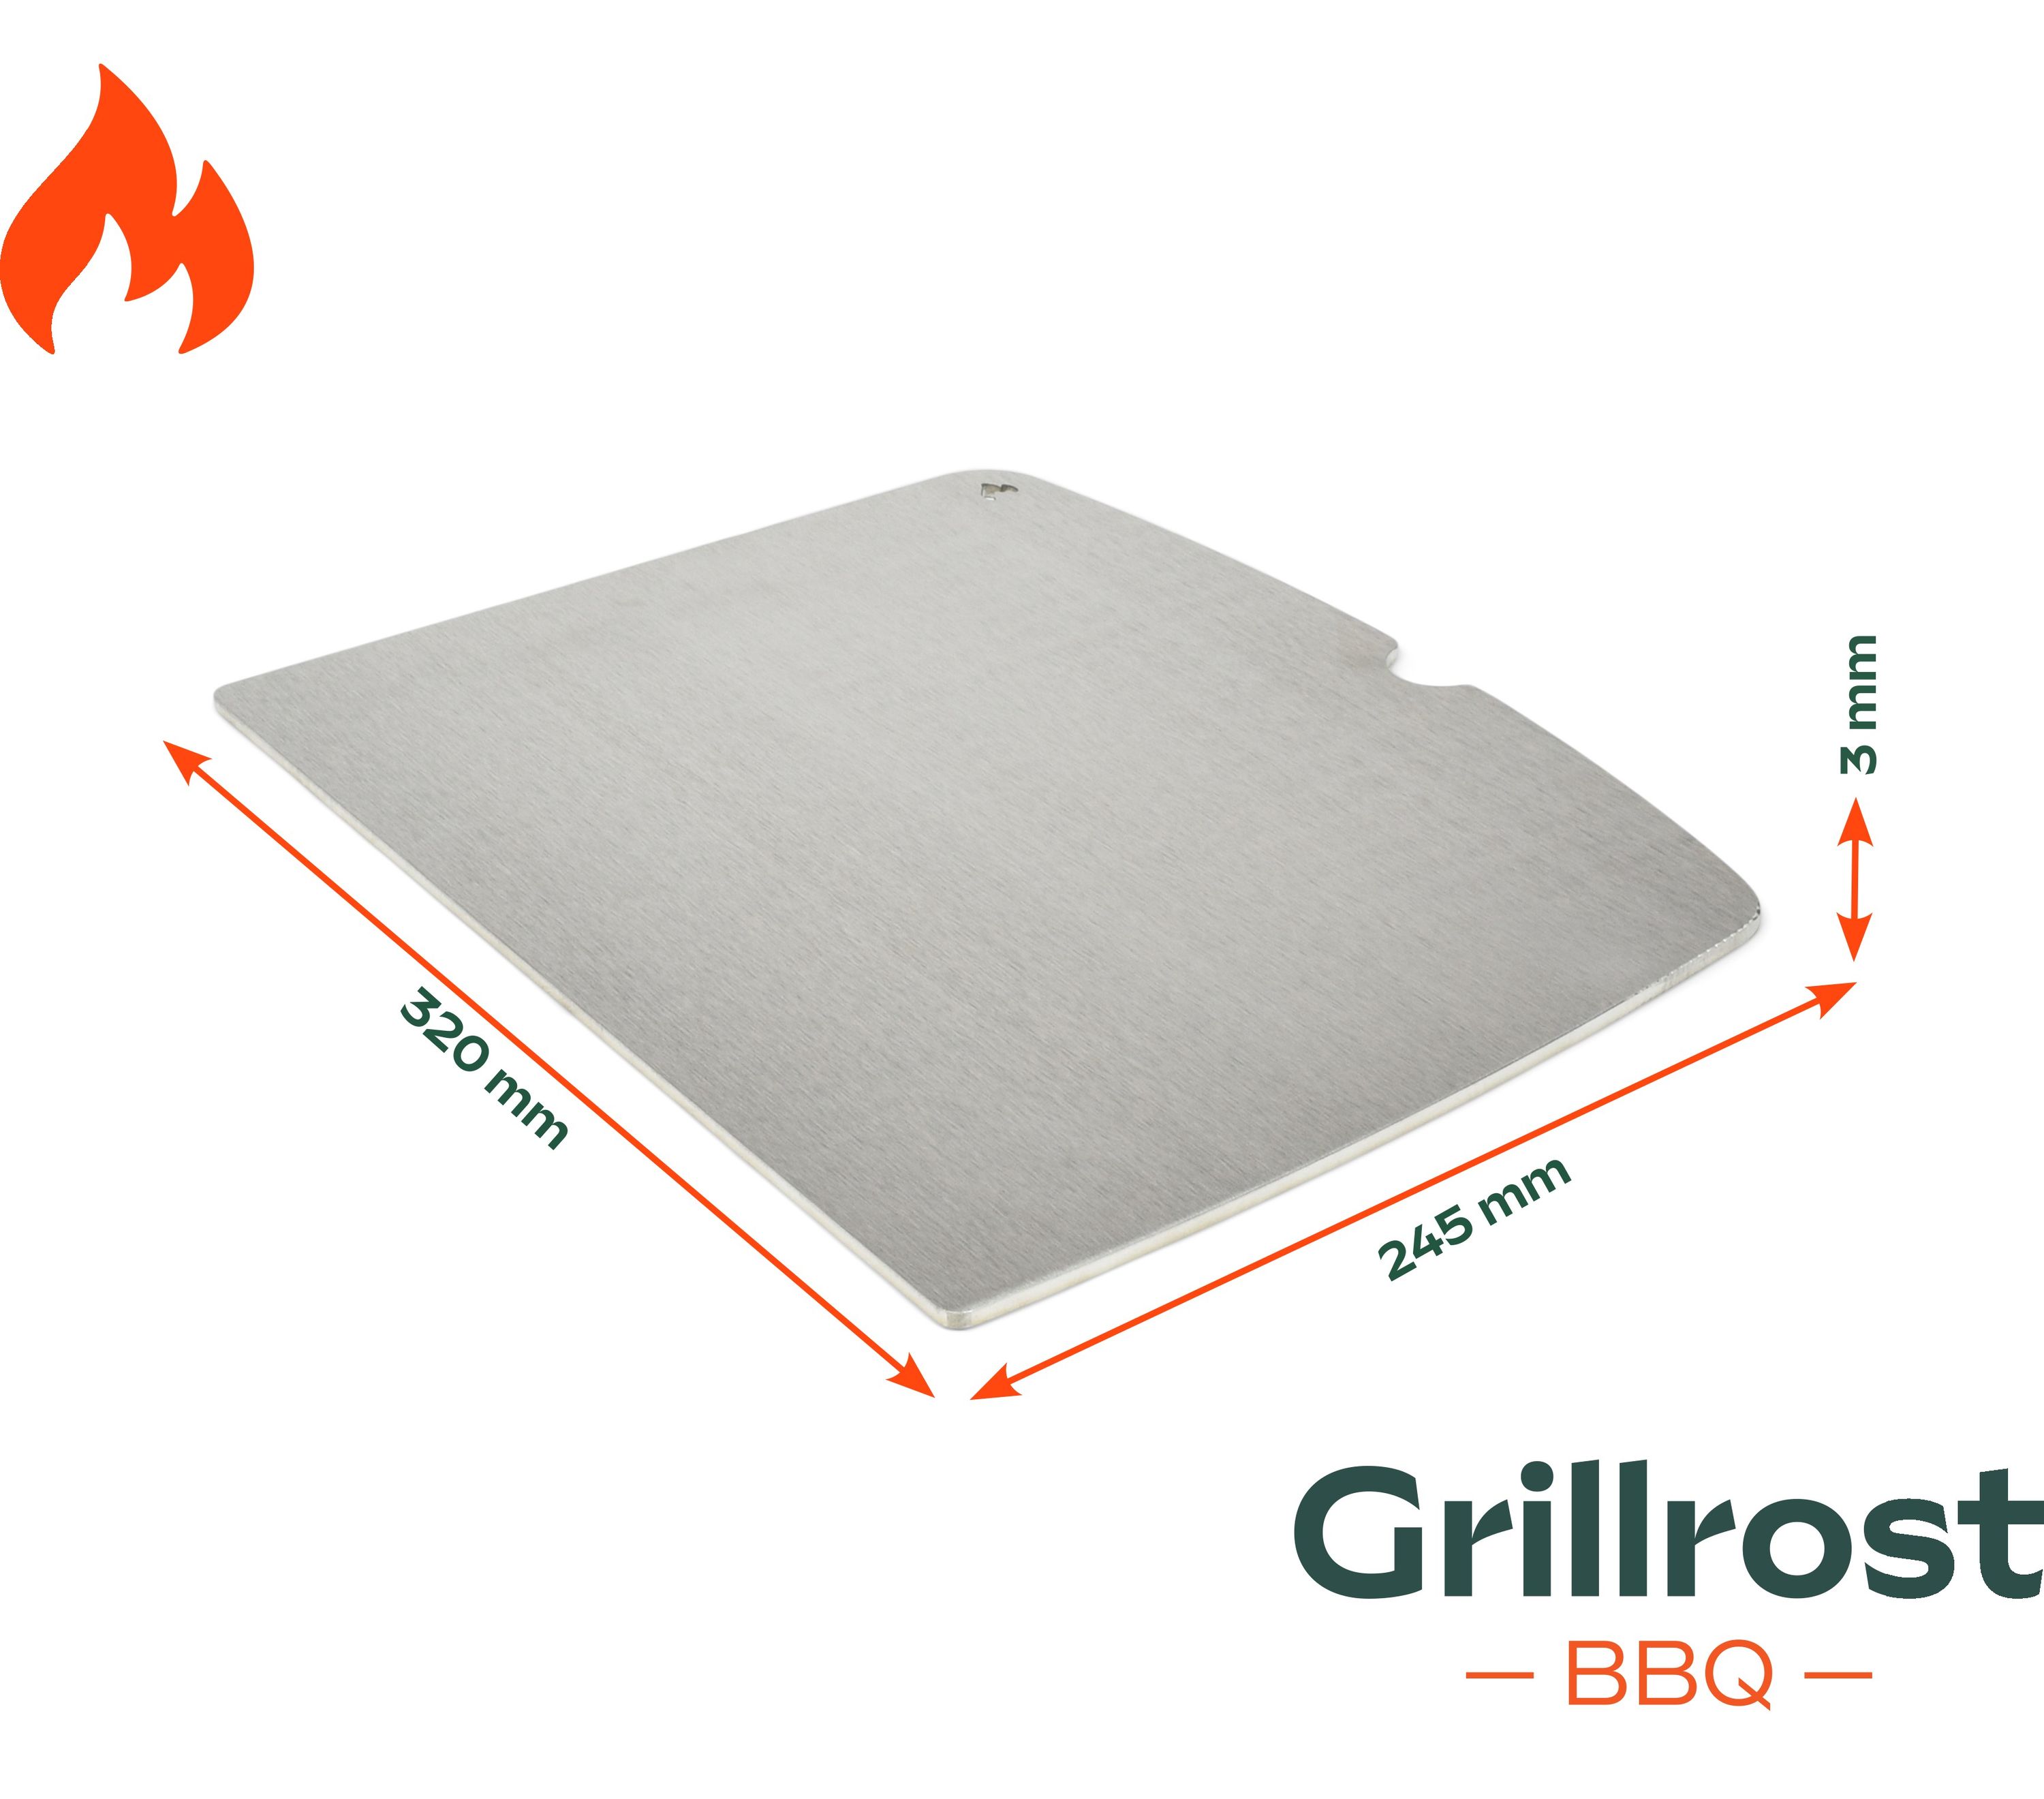 Enders Urban | Explorer Grill Plate Stainless steel plancha